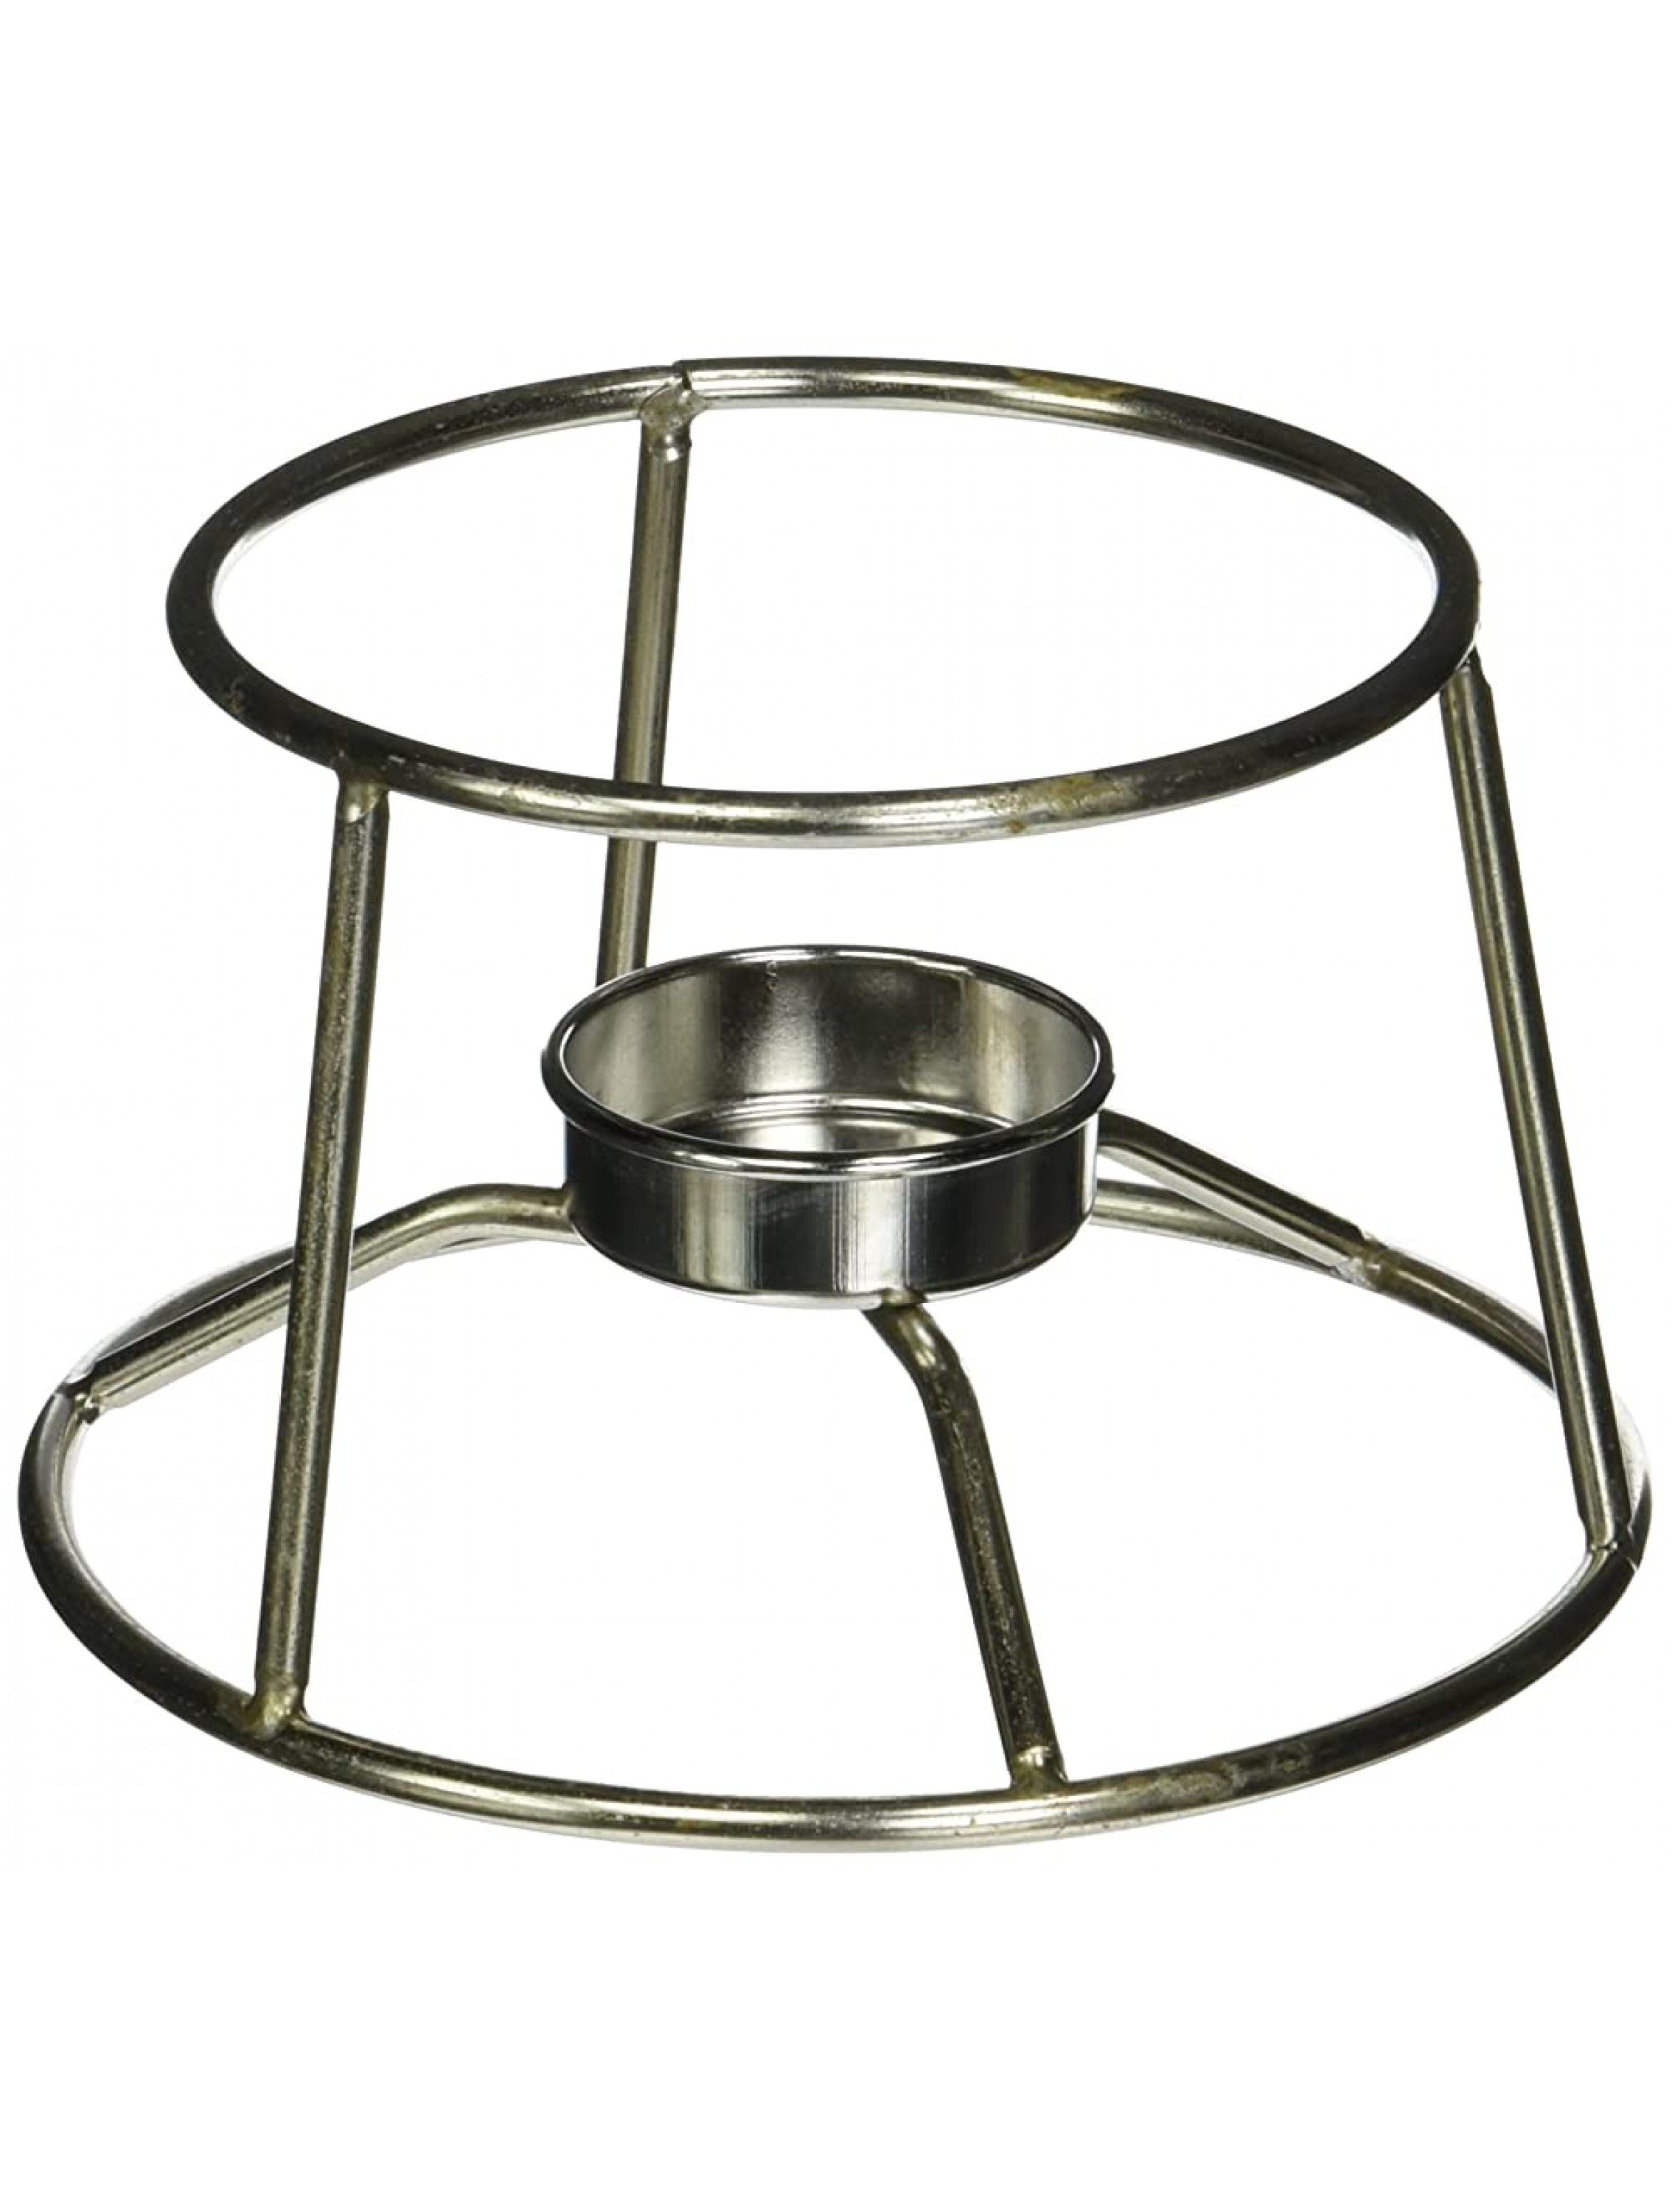 American Metalcraft CIFDR Stainless Steel Fondue Pot Stand 5-Inch Diameter - BO7OY58O3